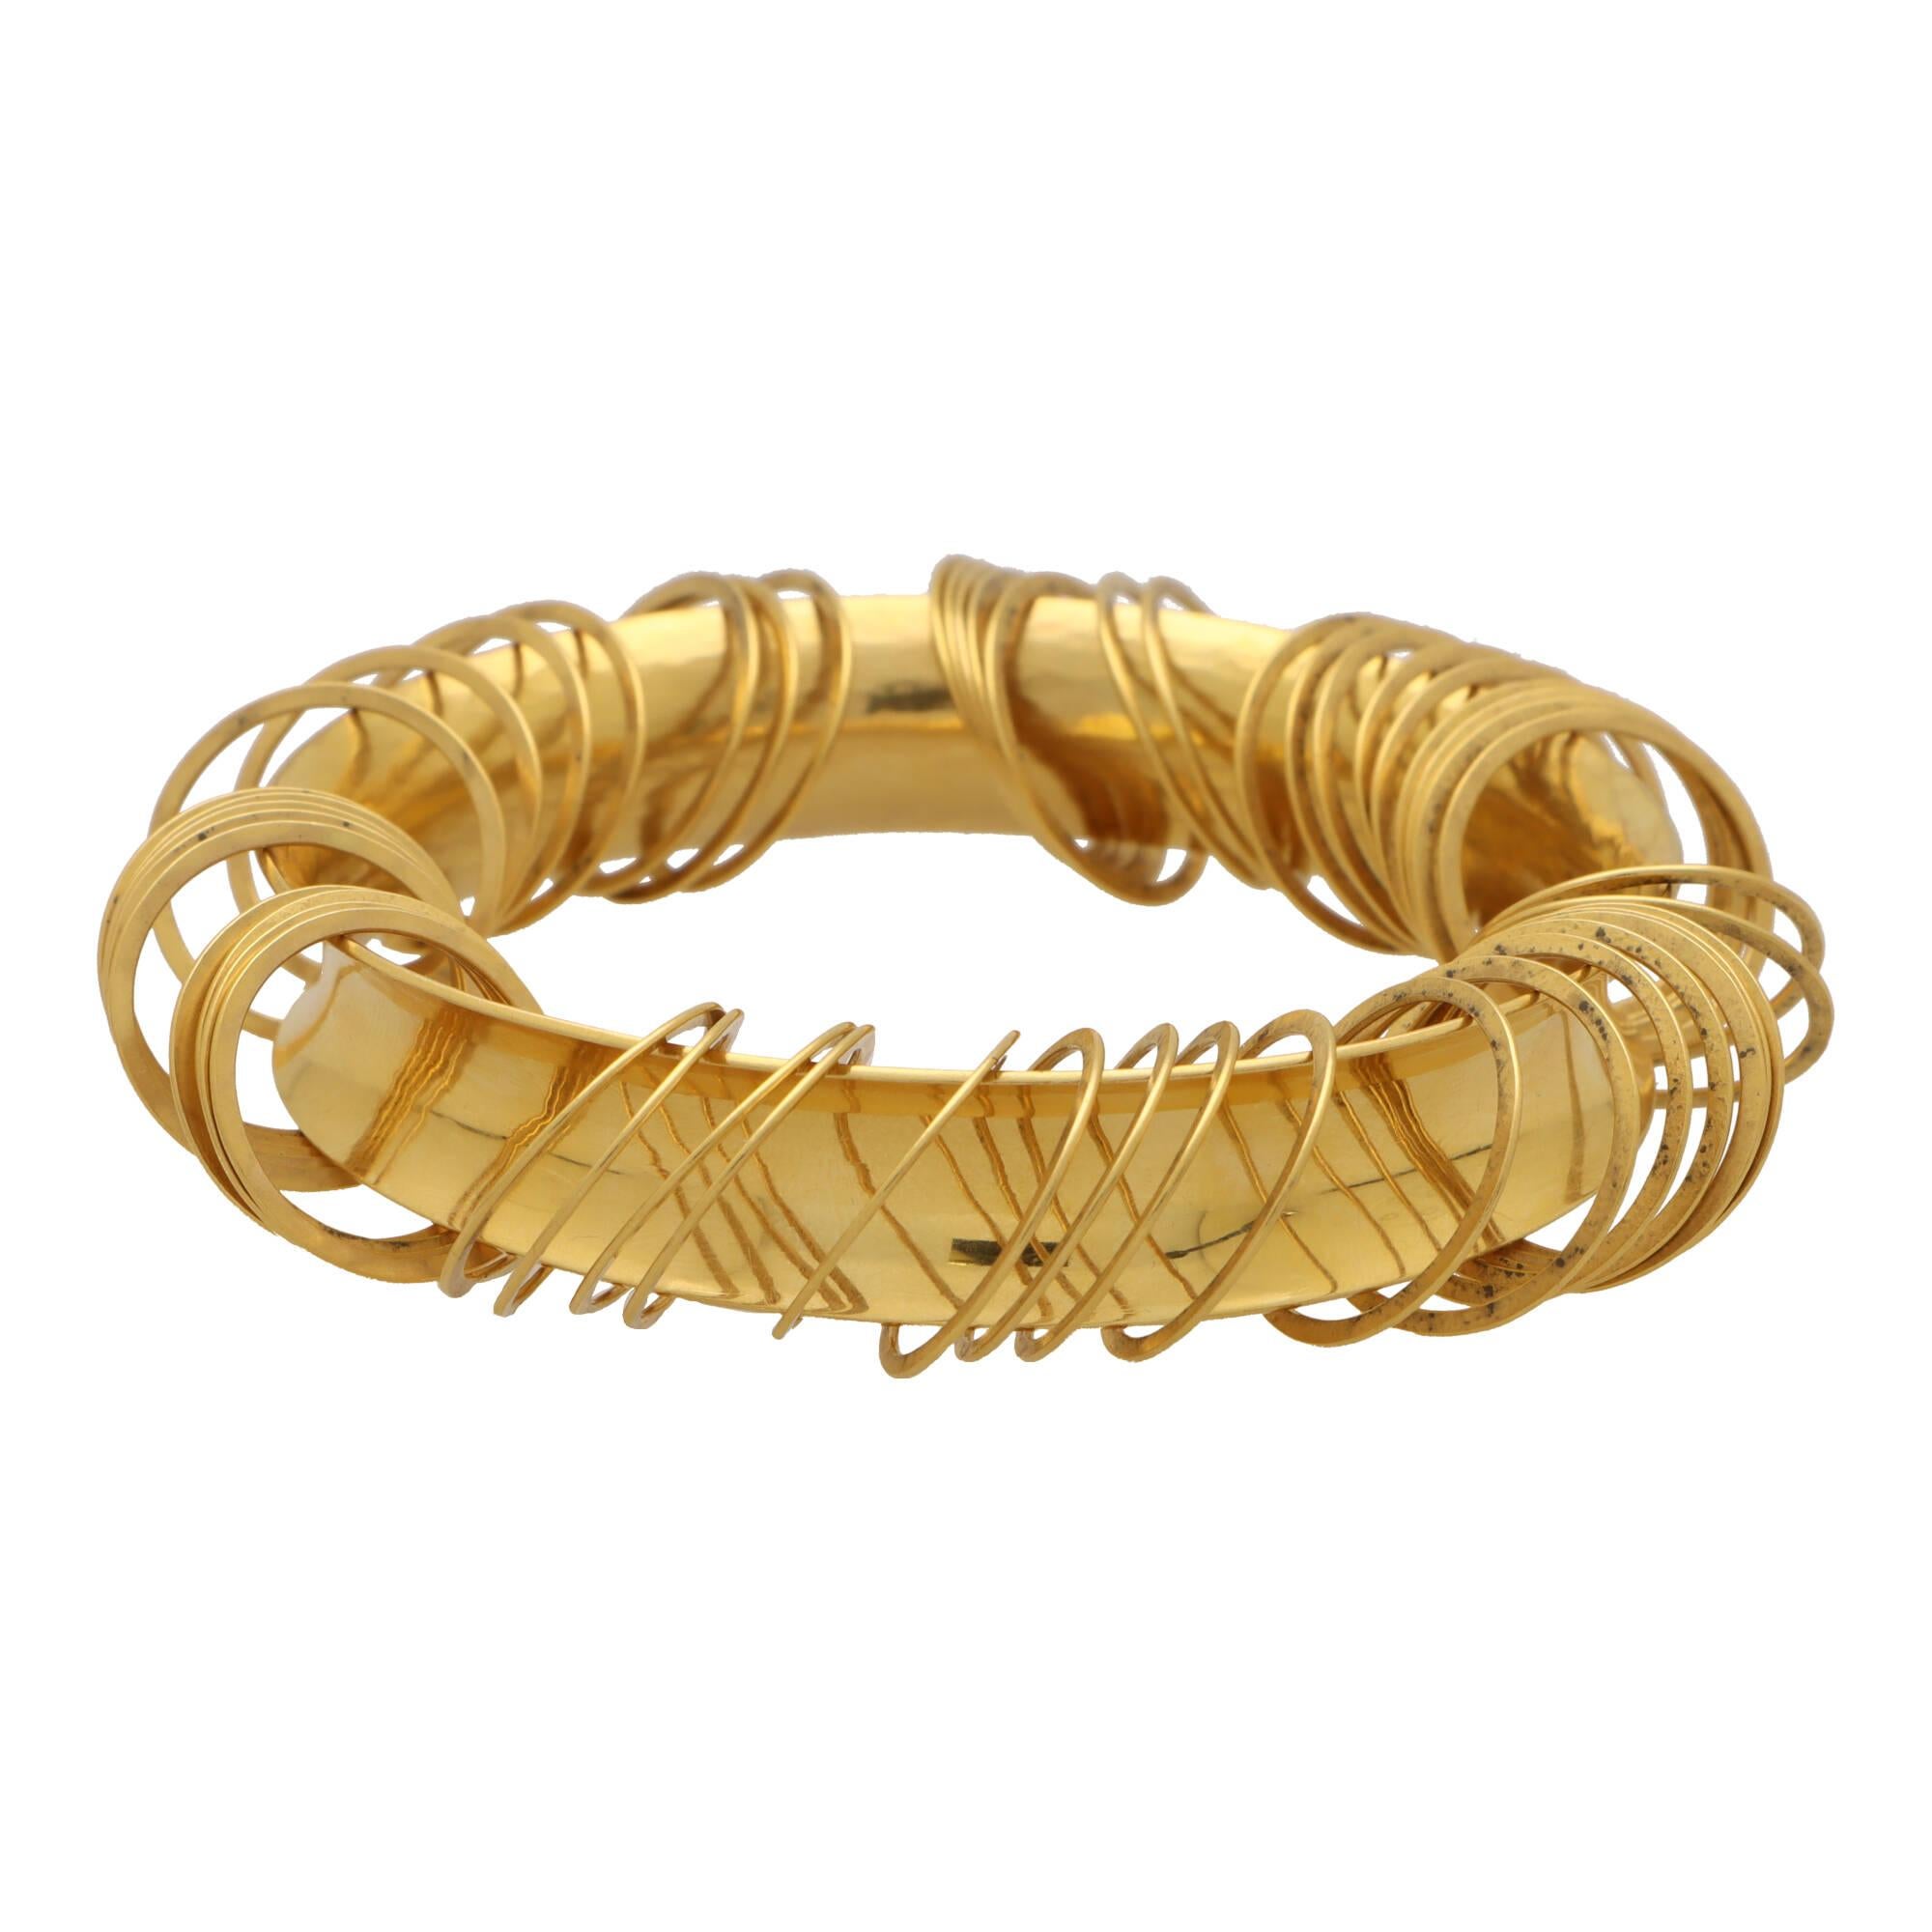 An extremely unique vintage 1990’s concave bangle in 22k yellow gold.

The bangle is composed in a solid 22k yellow gold concave design with a subtle hammered effect on the inside. Interestingly, attached and hanging from the bangle are 50 circular